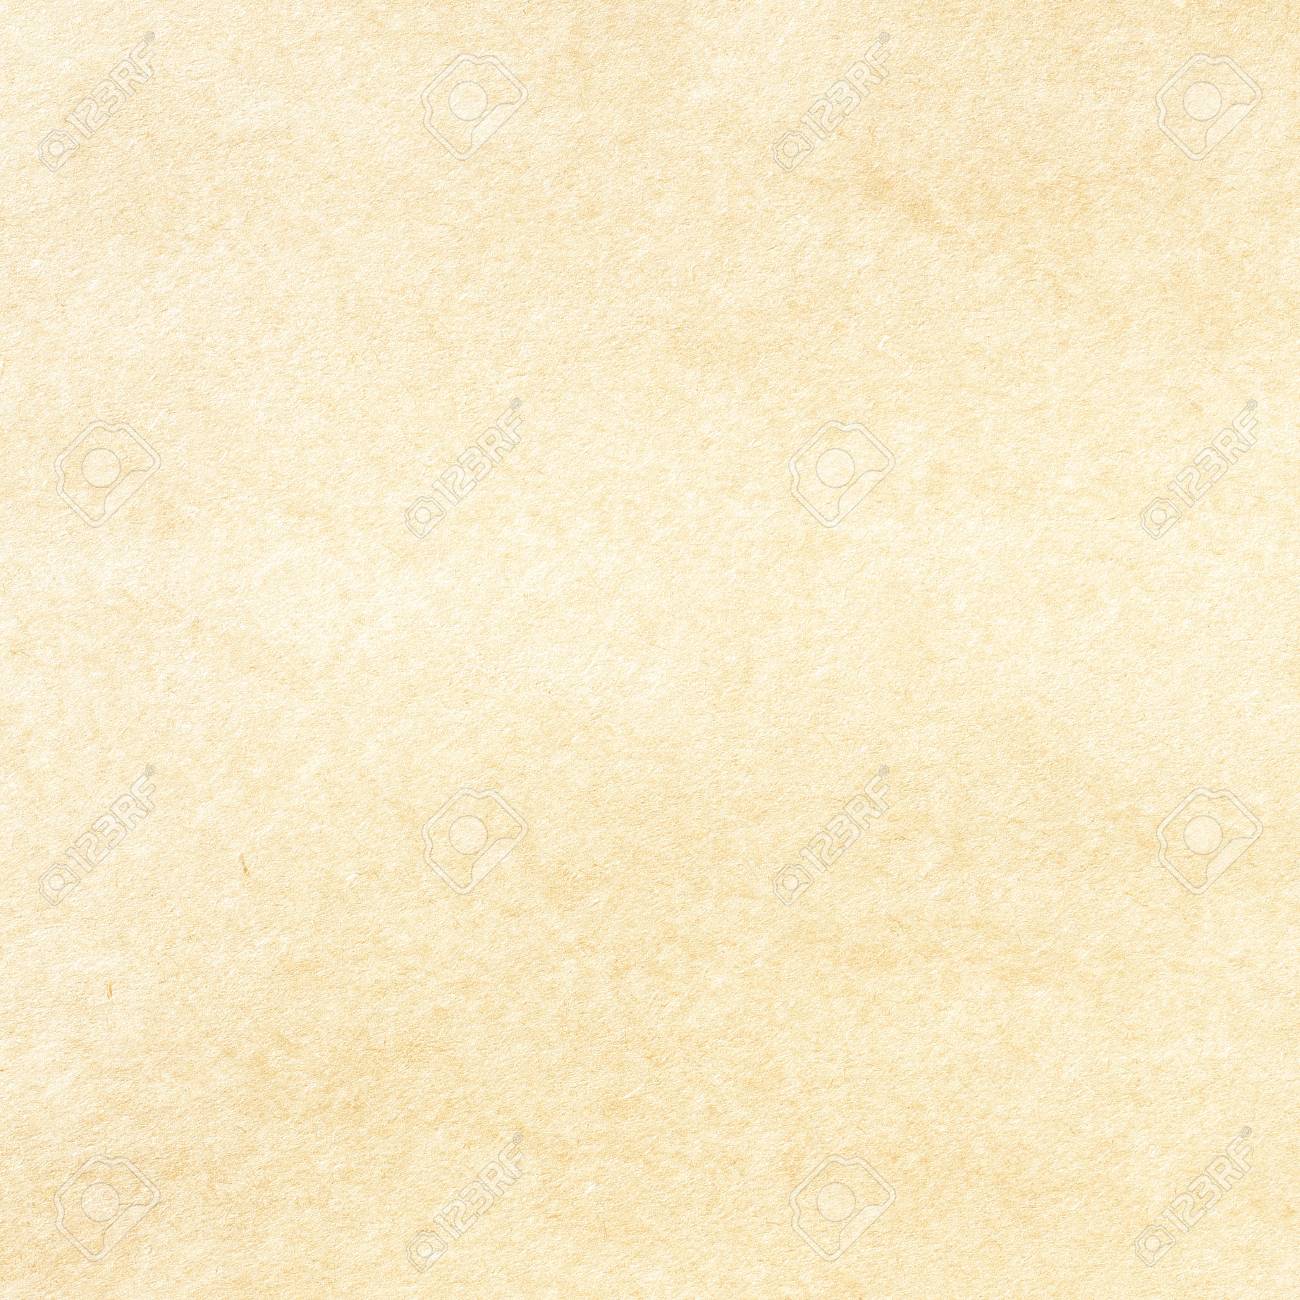 Crumpled Brown Background Paper Texture Stock Photo Picture And